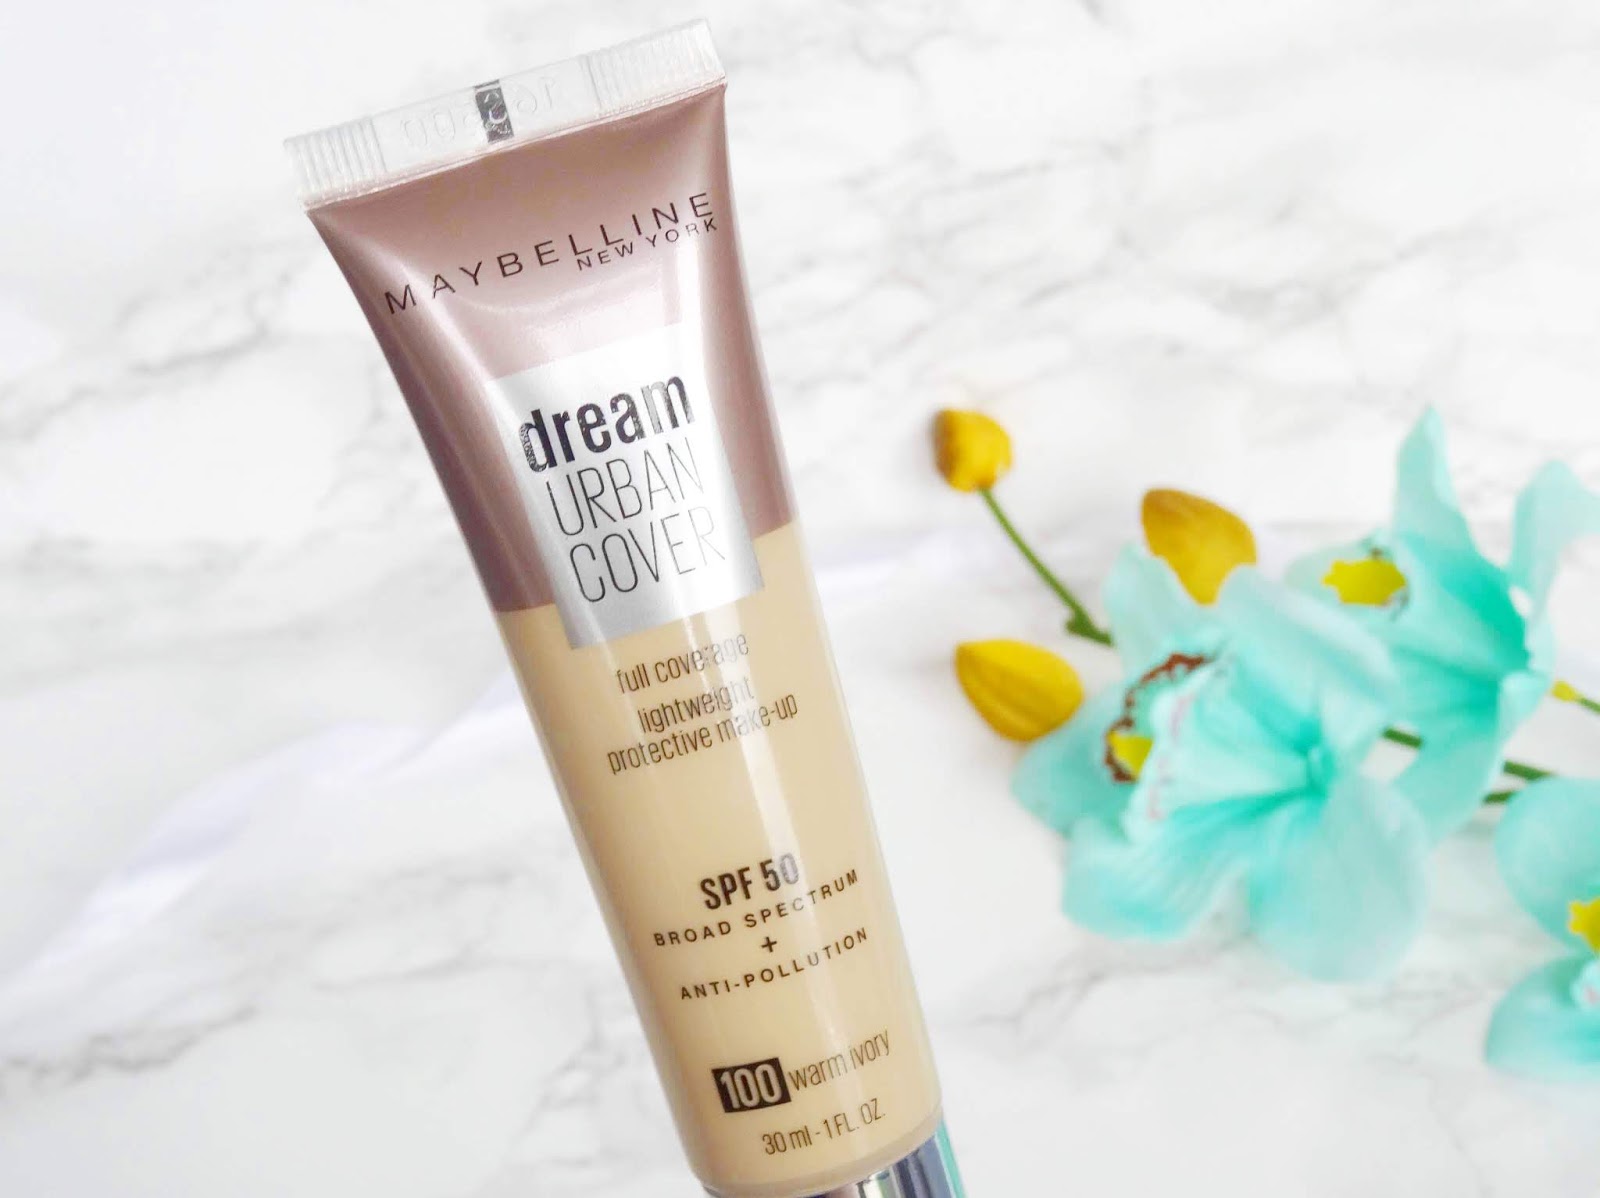 Maybelline Dream Urban Cover Foundation Review